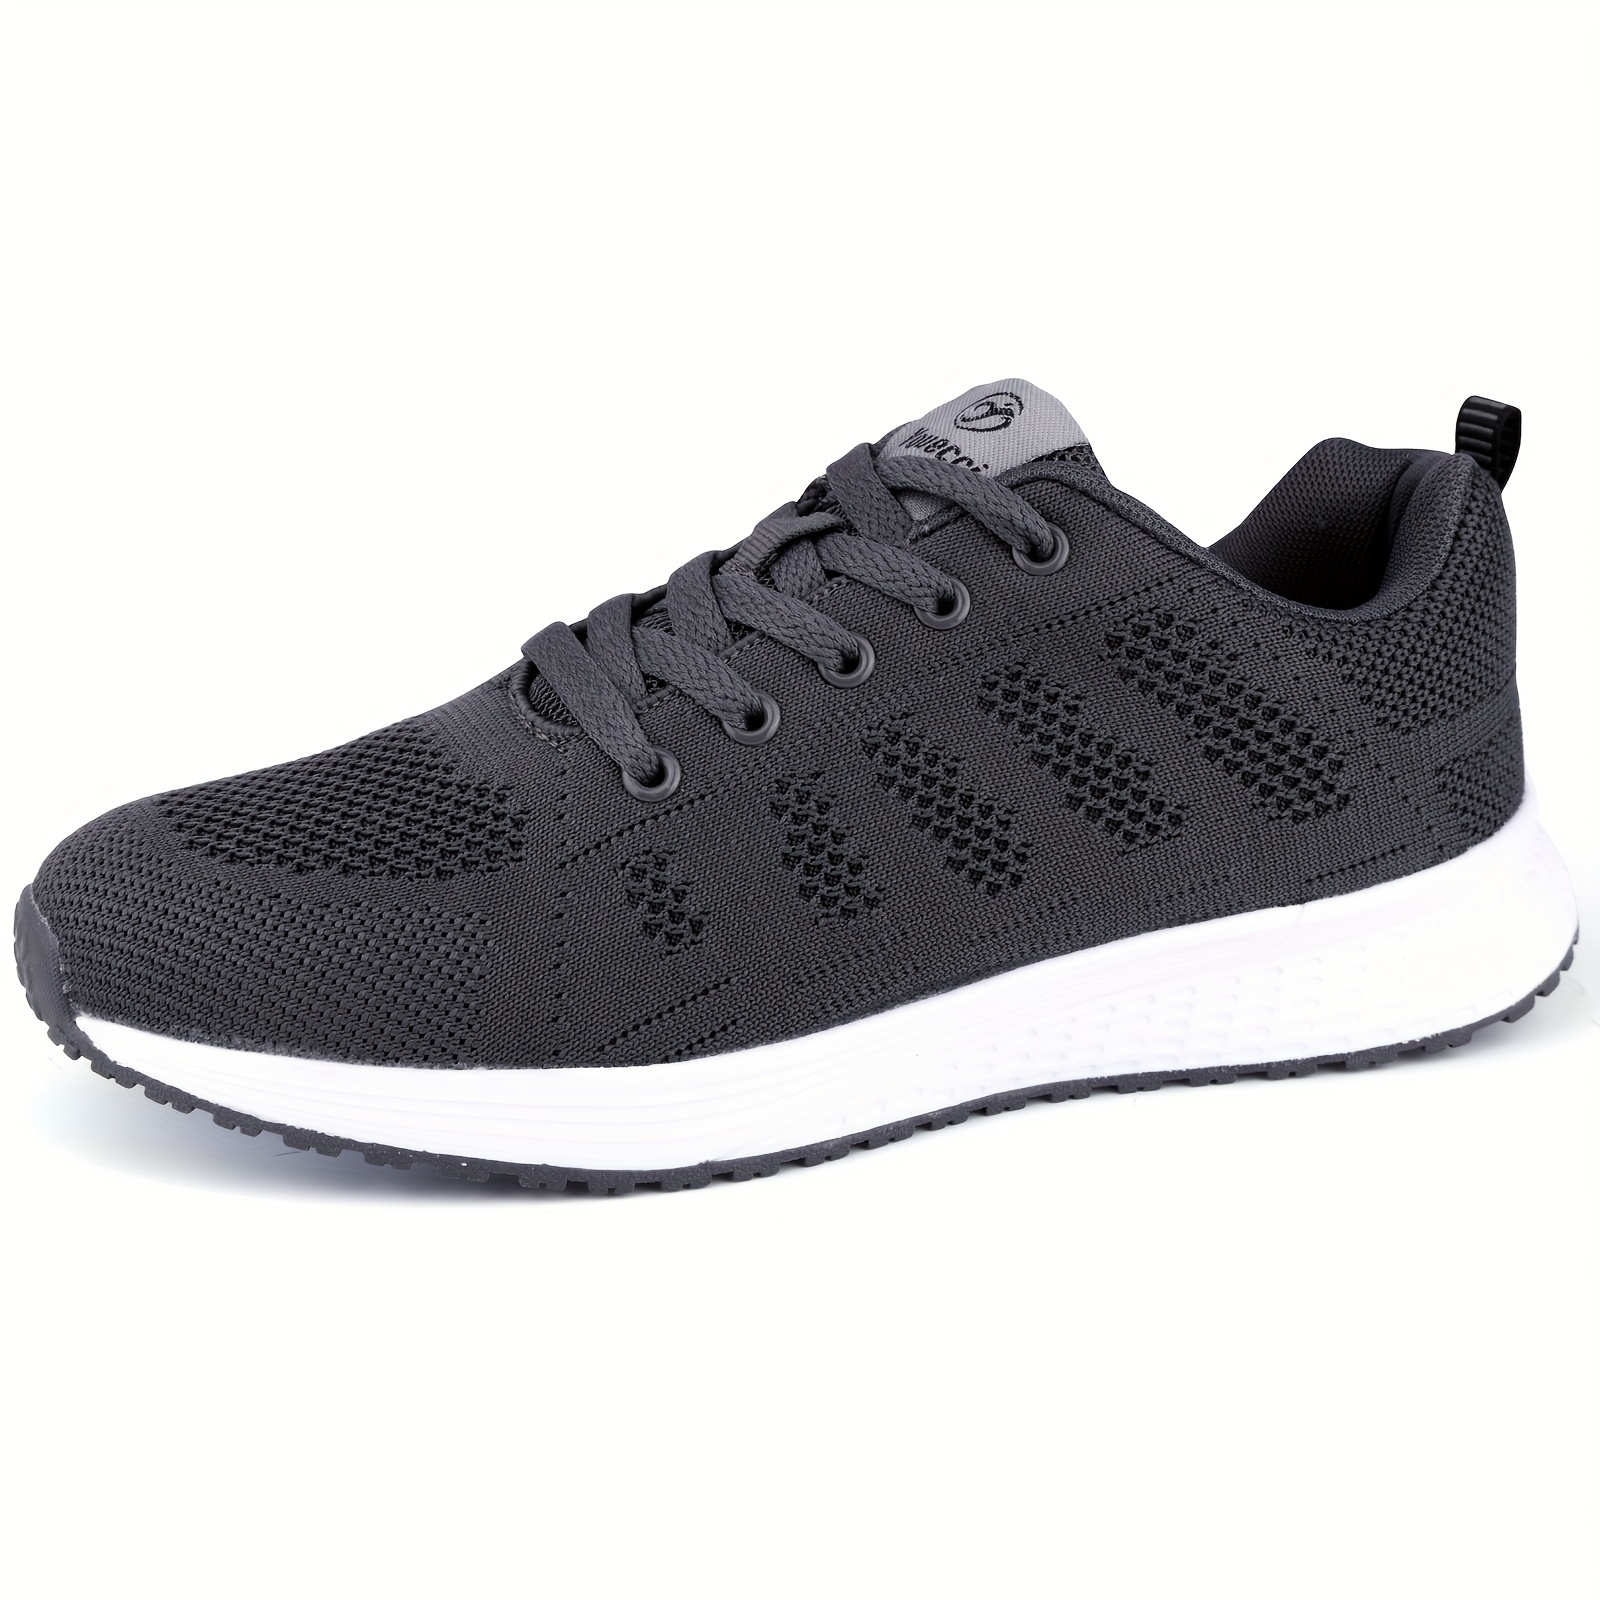 PMUYBHF Womens Sneakers Black Size 10 Womens Shoes Casual Mesh Laace Up  Solid Color Fashion Simple Shoes Running Shoes